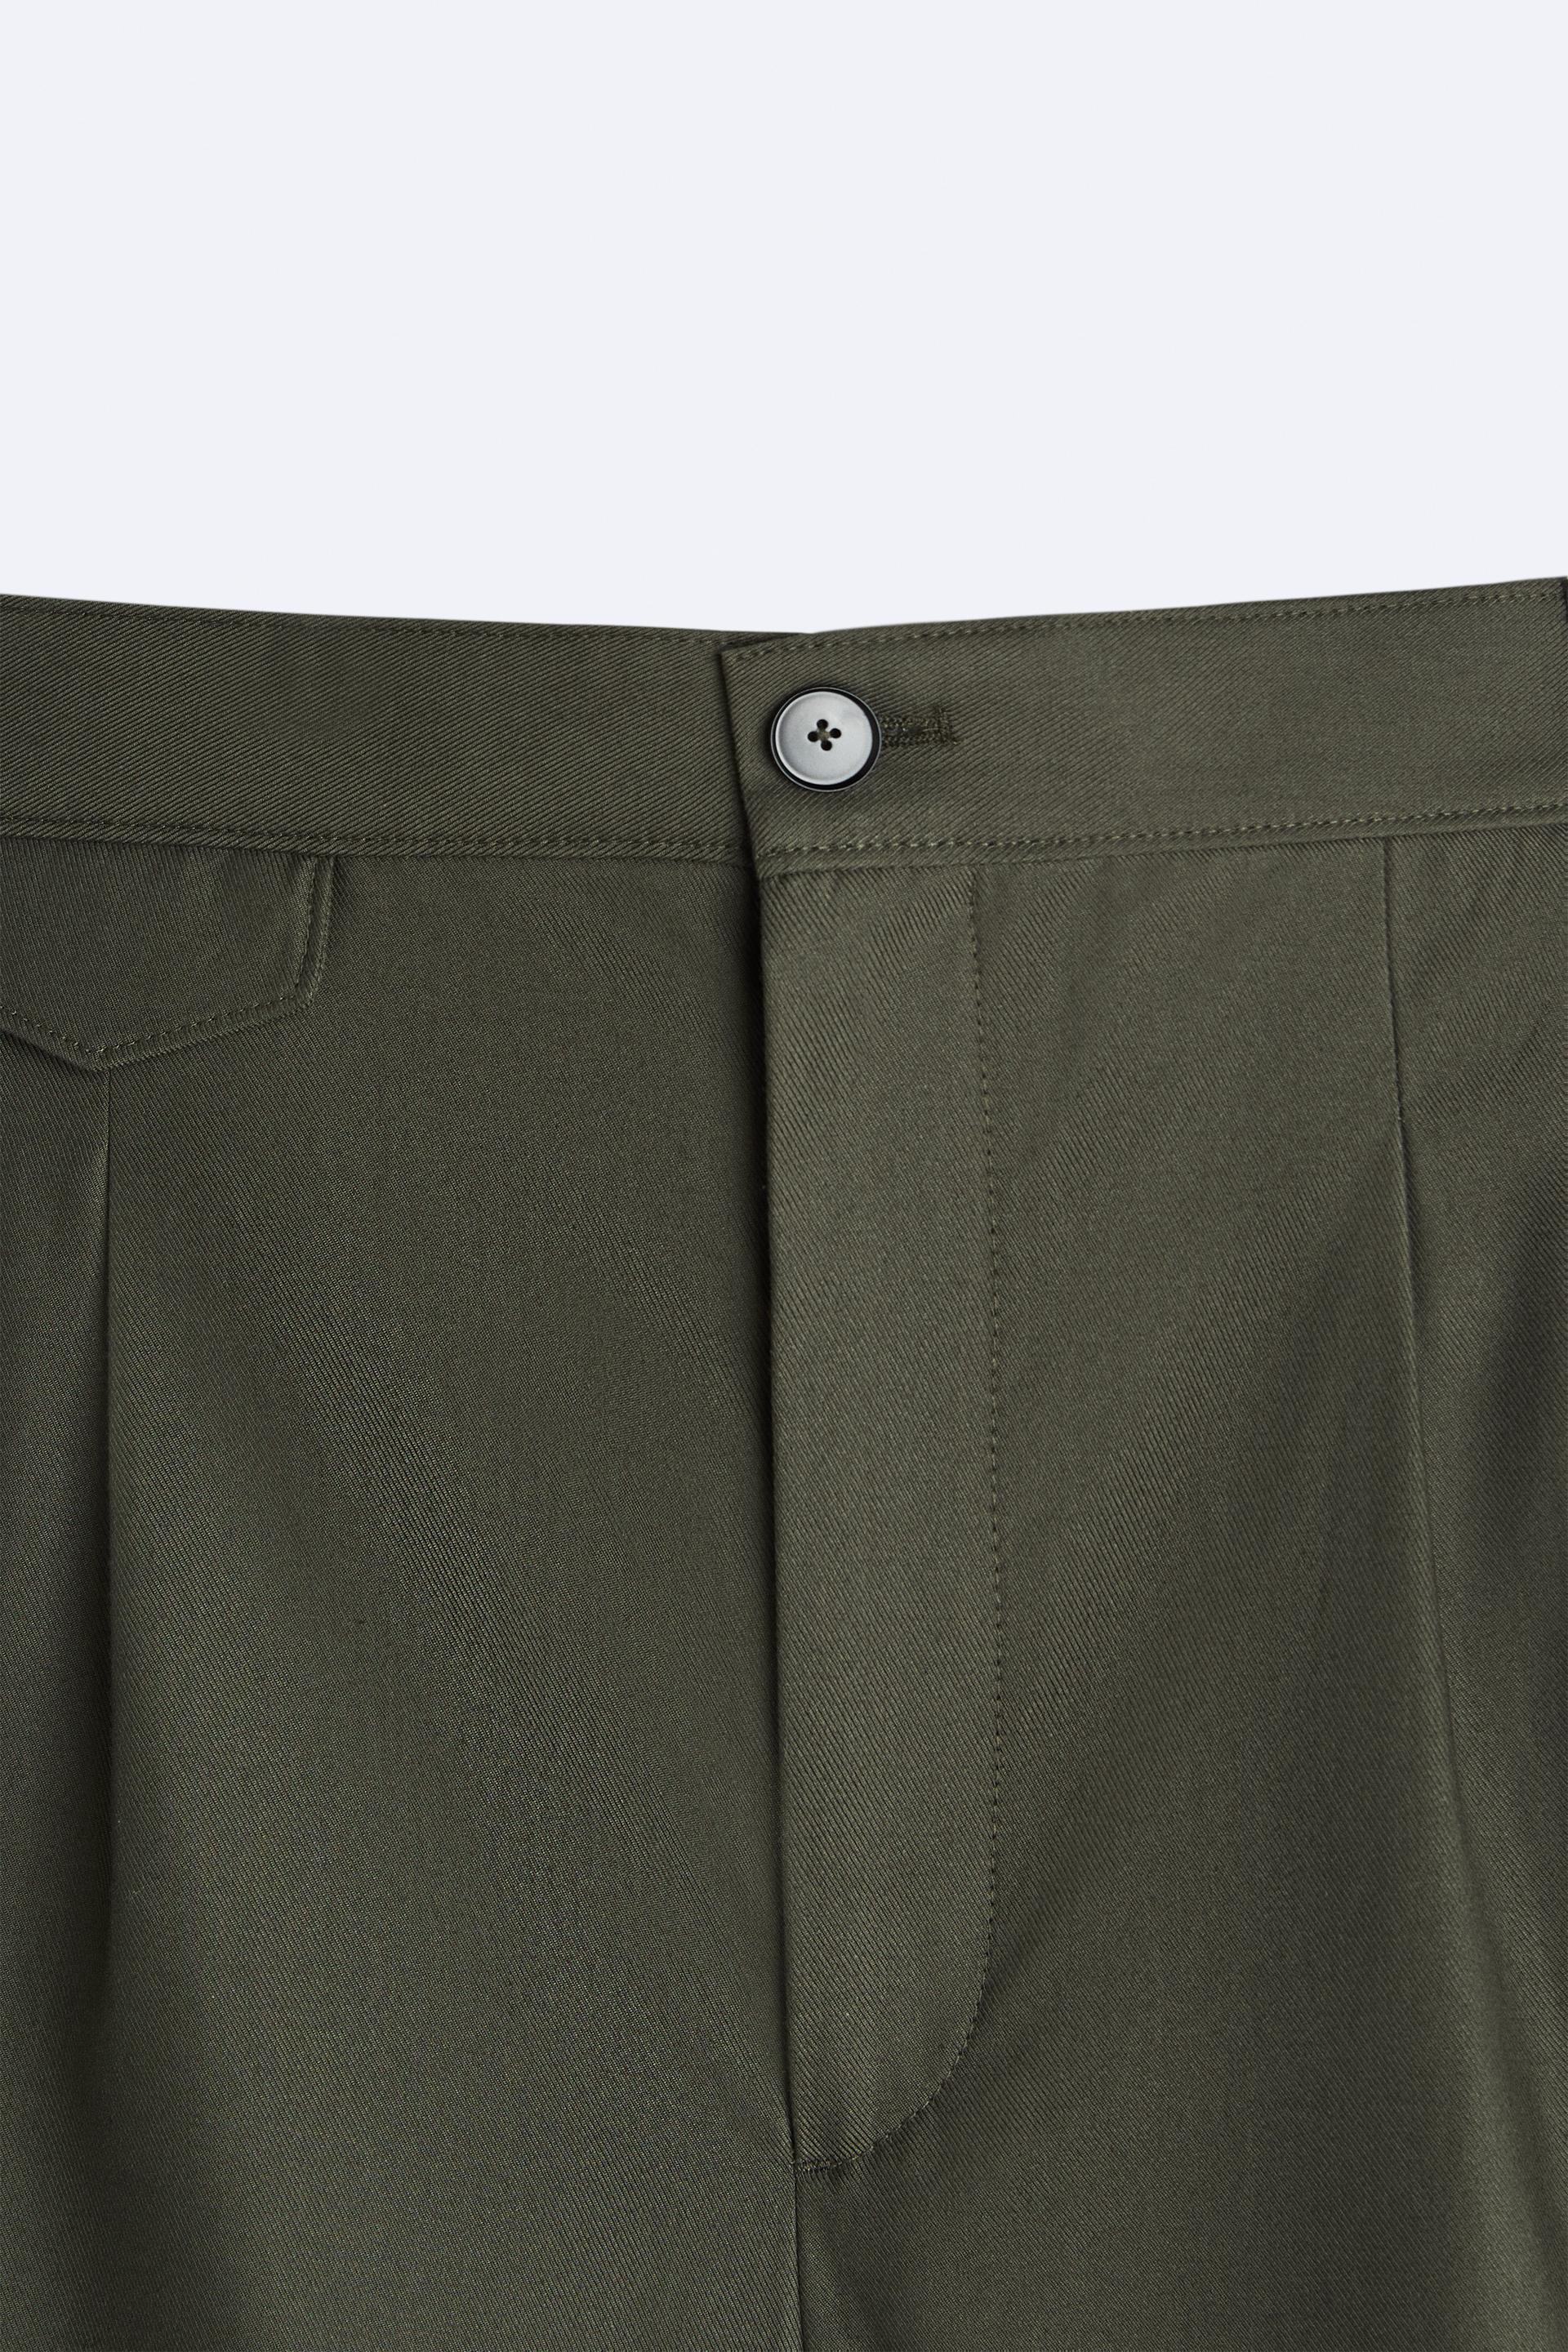 H & M - Lyocell-blend cargo trousers - Green, Compare